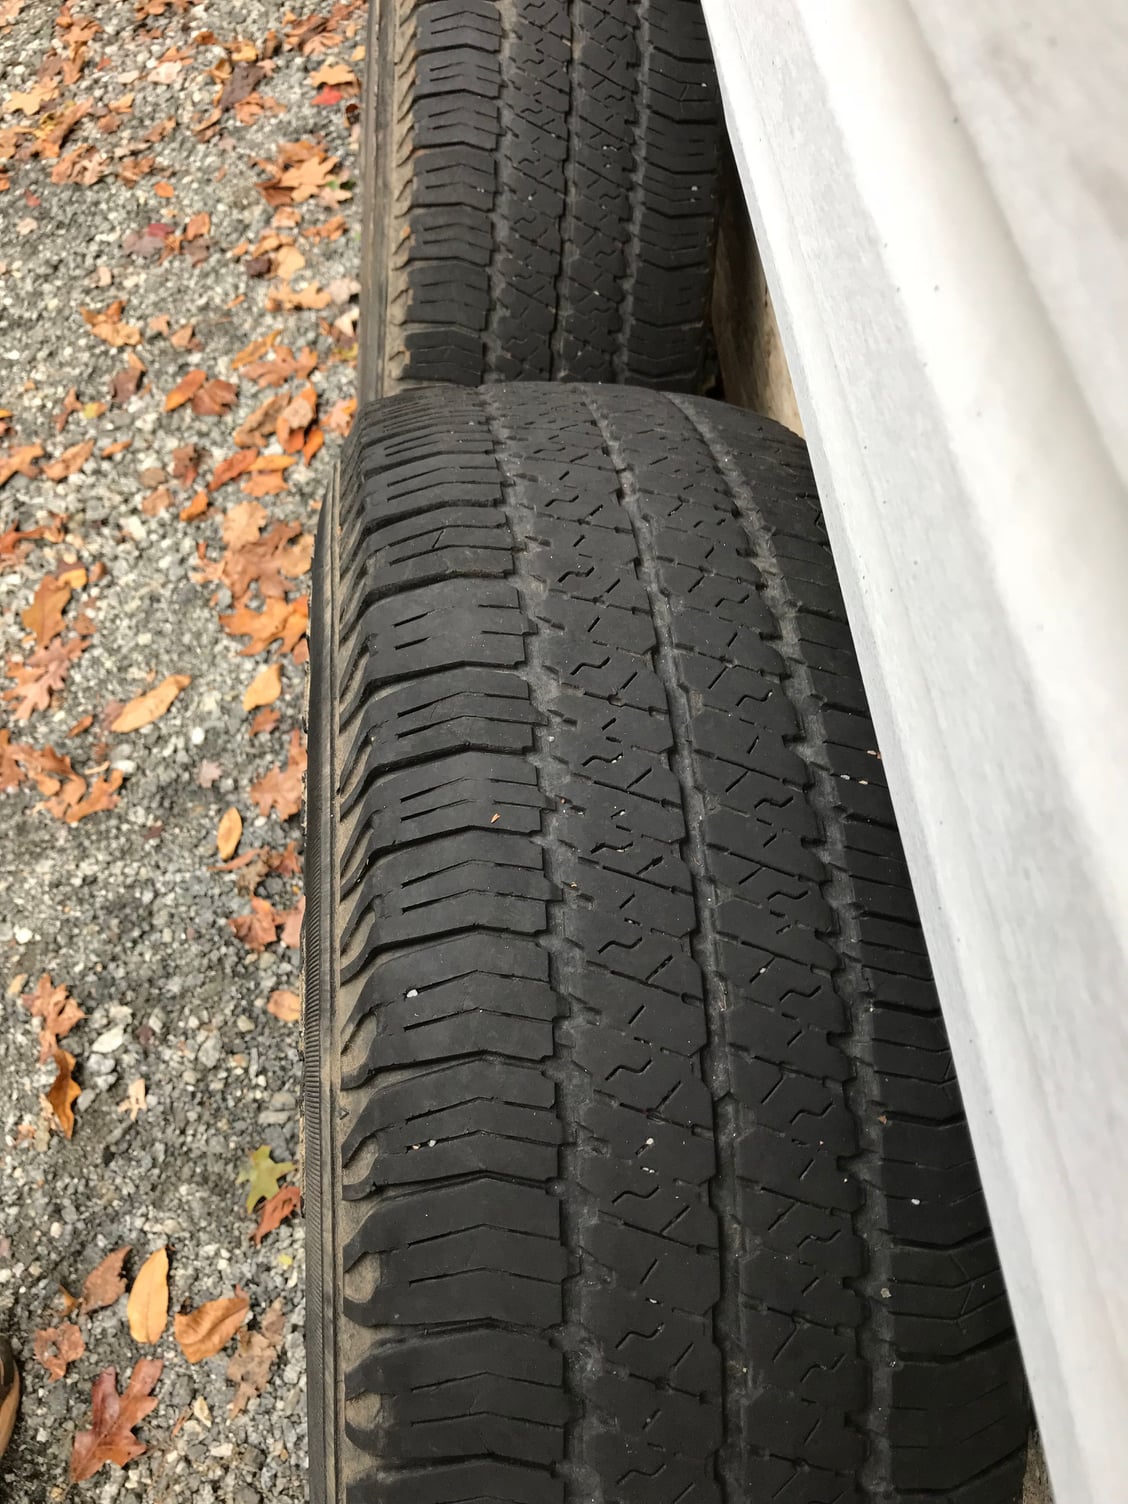 Wheels and Tires/Axles - Factory wheels + tires - Used - 2007 to 2017 Jeep Wrangler - Ruckersville, VA 22968, United States